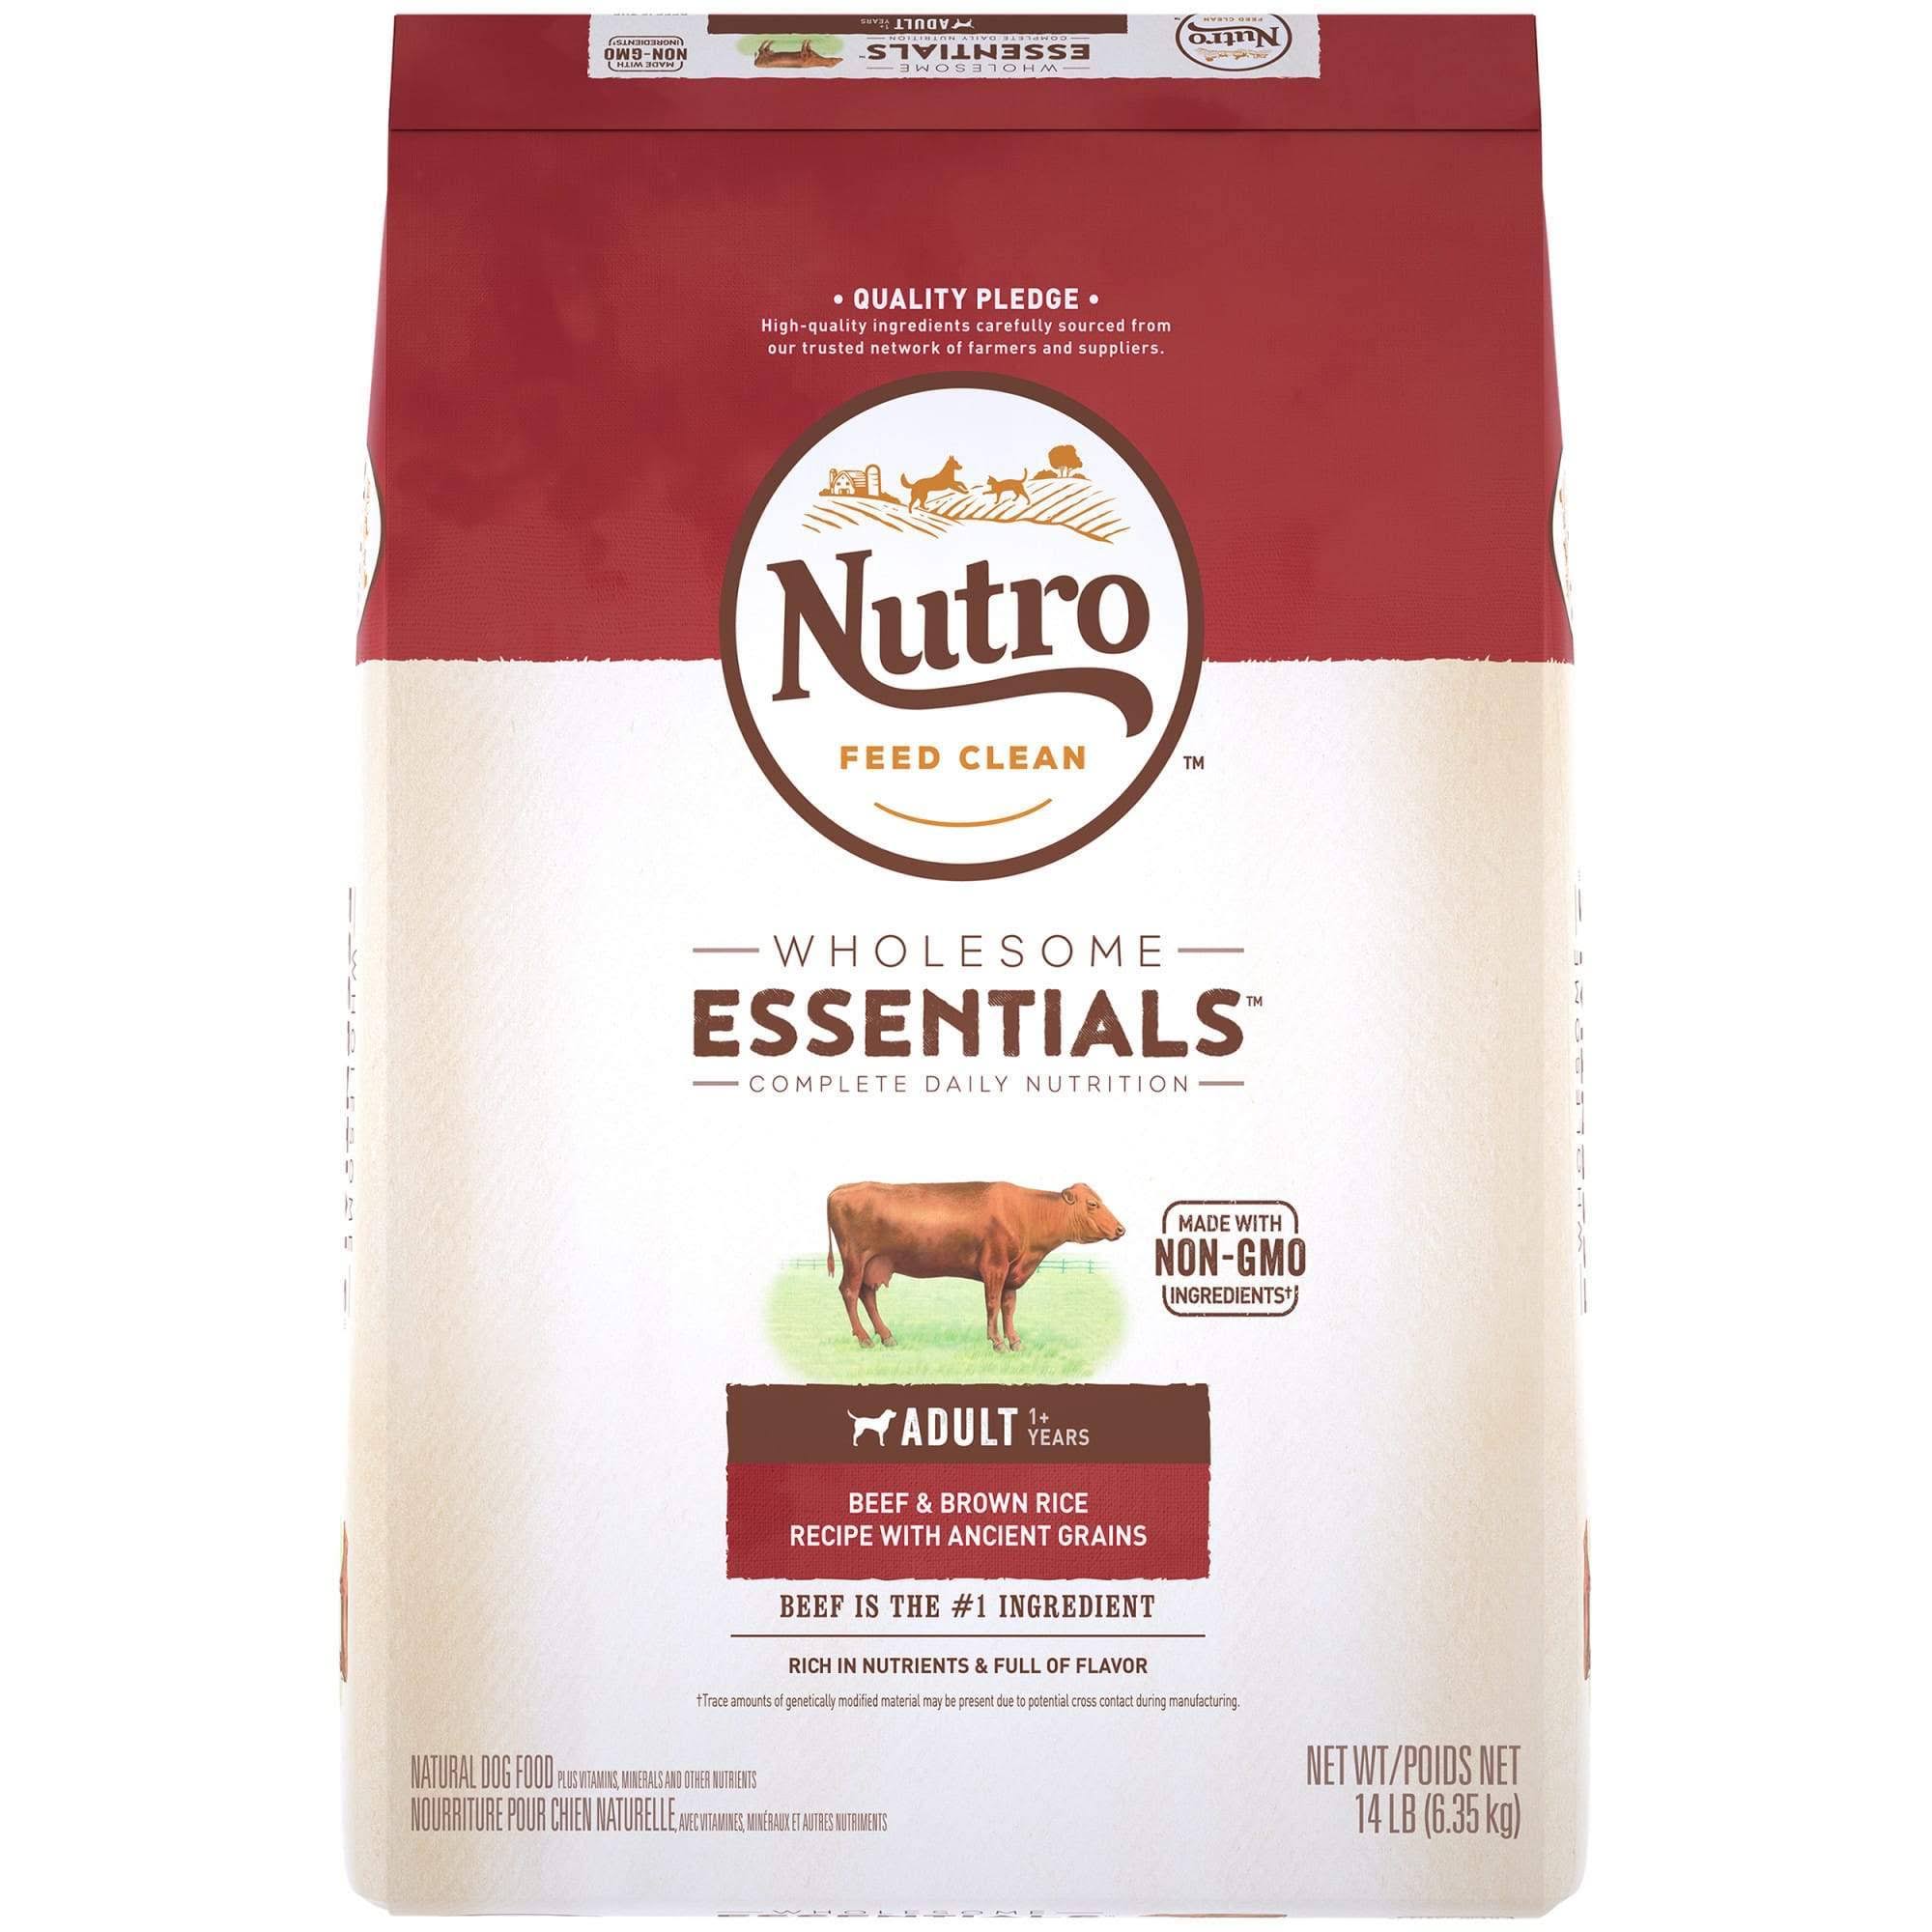 Nutro 28 lb Natural Choice Beef & Brown Rice Adult Dry Dog Food